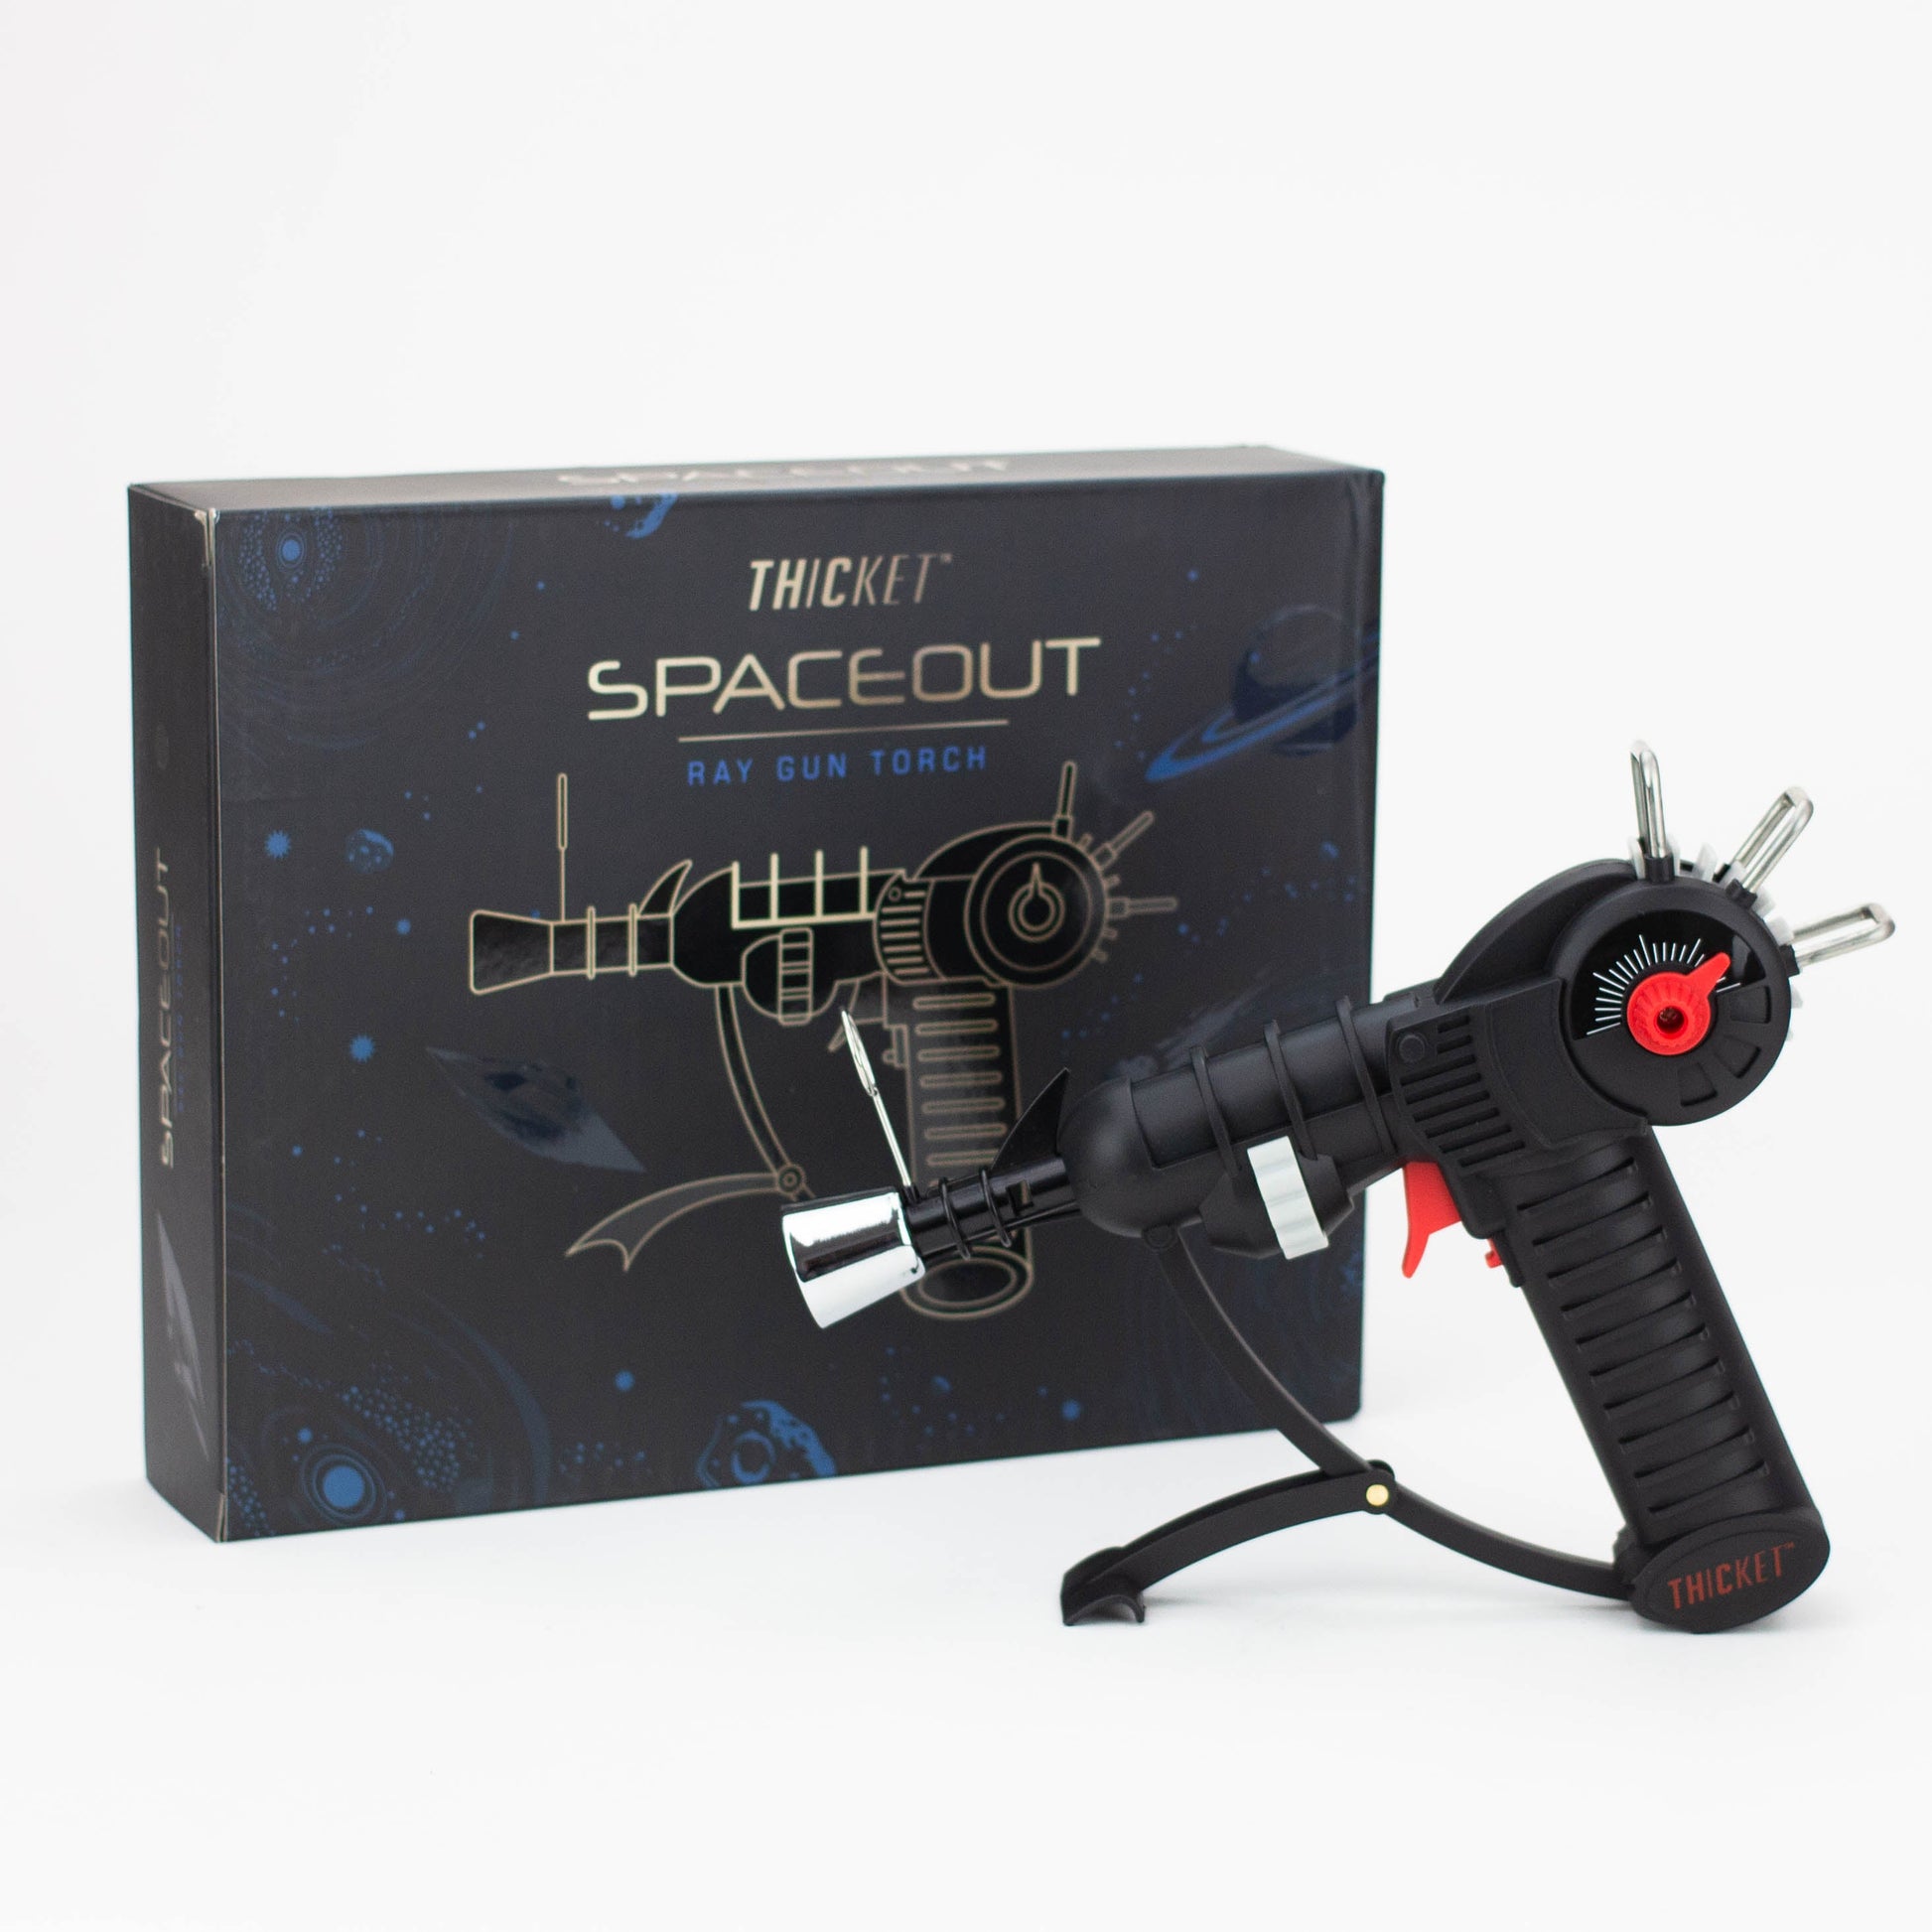 Thicket | Spaceout Raygun Torch Lighter_3